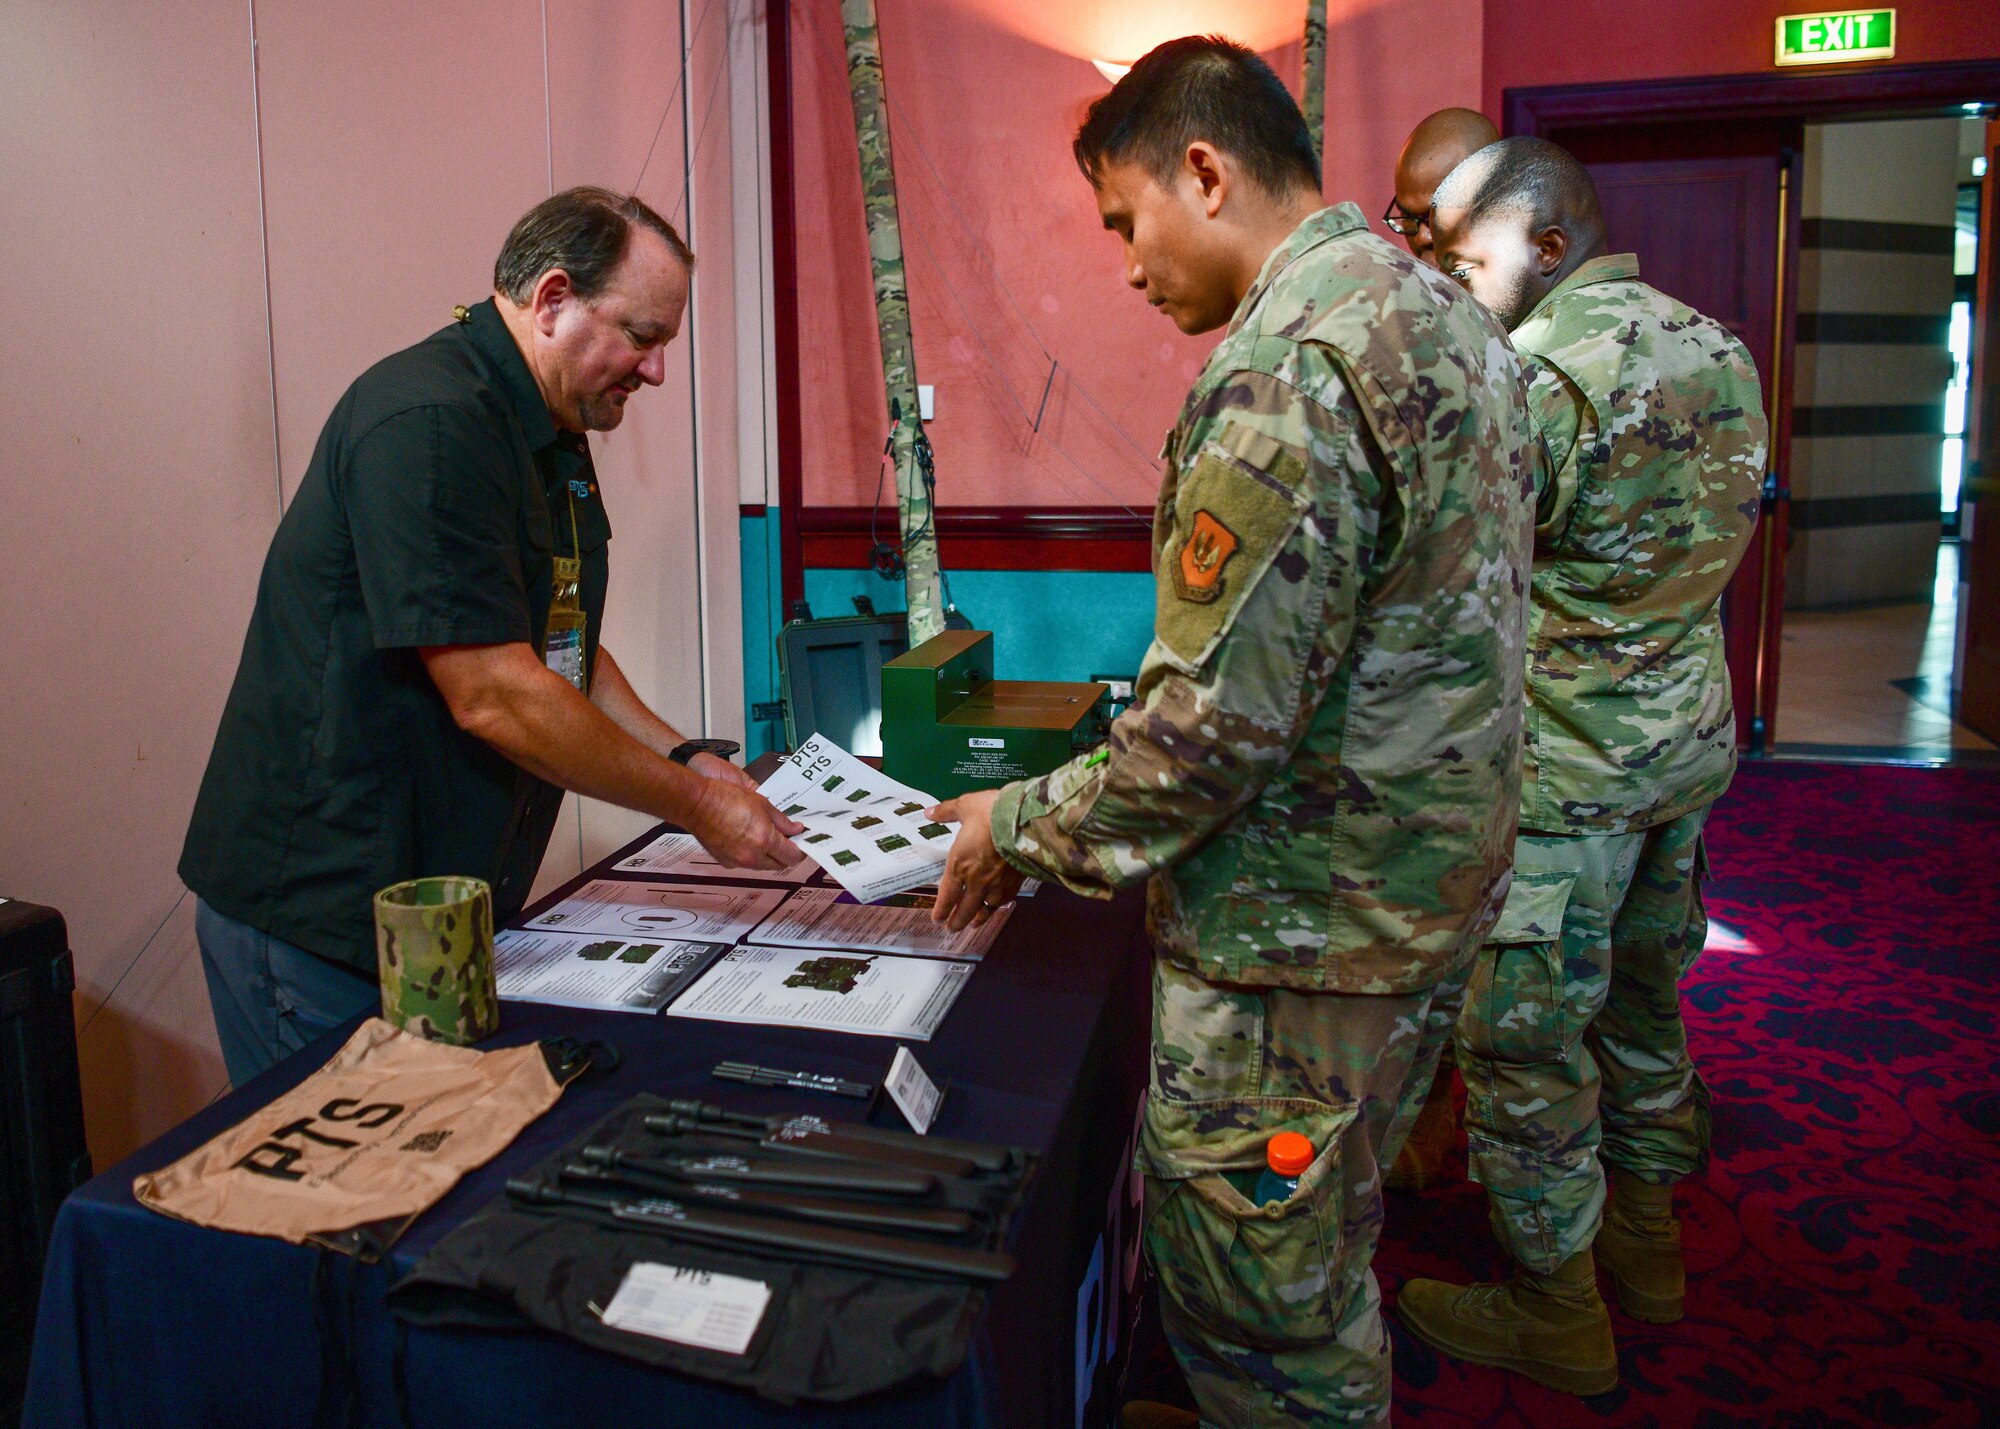 U.S. Airmen inspect products from an industry partner during a Tech Expo hosted by the 31st Communications Squadron at Aviano Air Base, Italy, Oct. 25, 2022. The expo served an opportunity for organizations and units structured under the 31st Fighter Wing and other tenant units to see the latest in emerging technologies, network with industry experts and share ideas and future goals. (U.S. Air Force photo by Senior Airman Brooke Moeder)